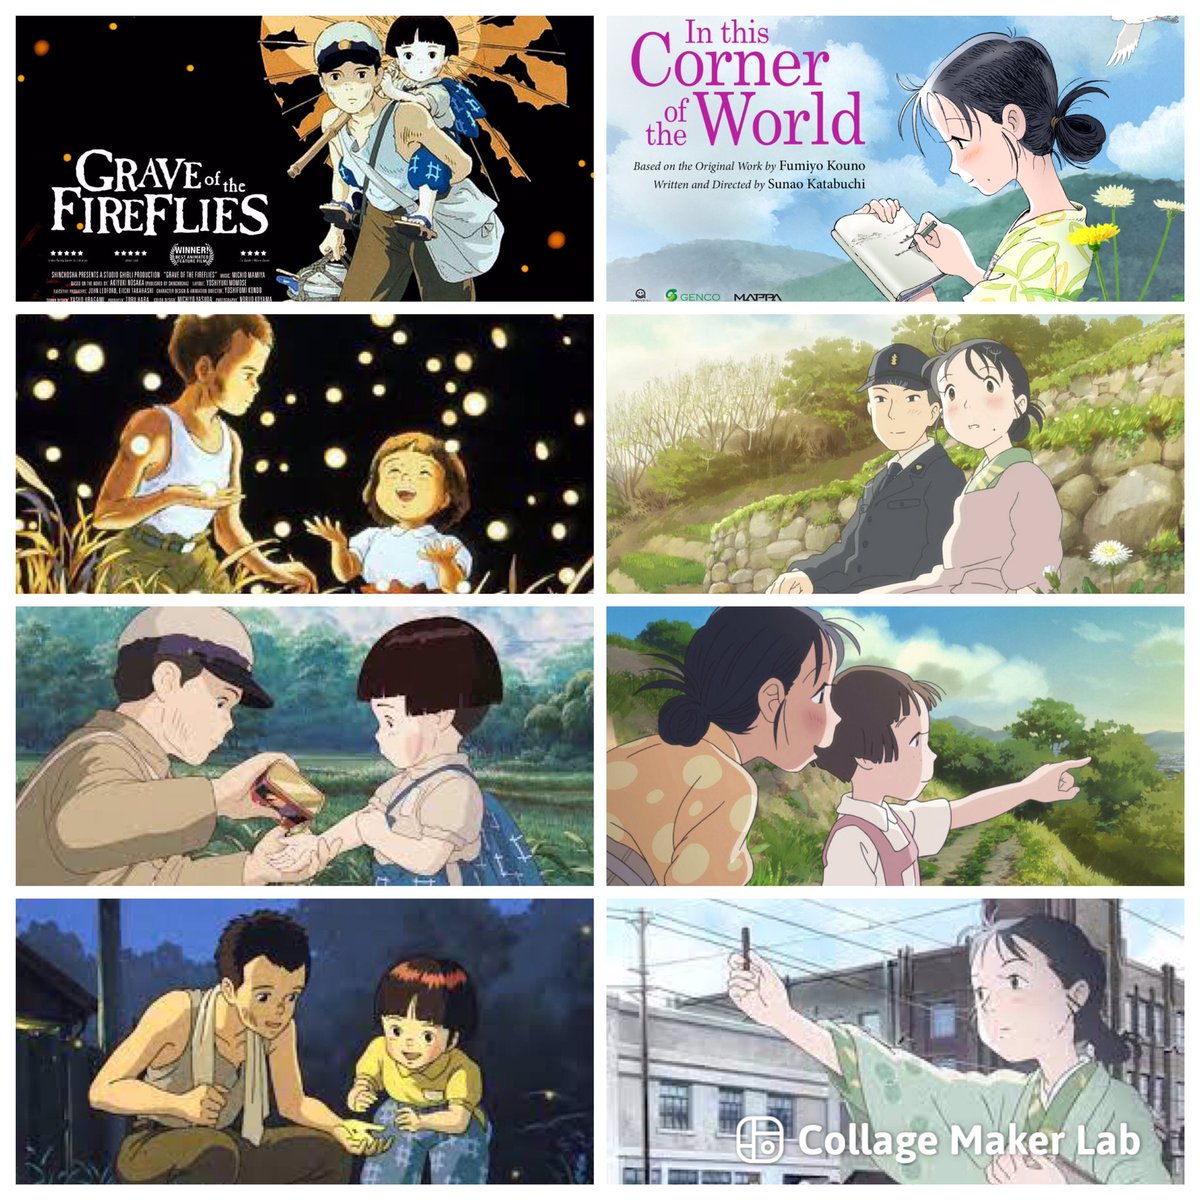 Grave of the Fireflies & In this Corner of the World both took place during WWII 
#GraveoftheFireflies #InthisCorneroftheWorld